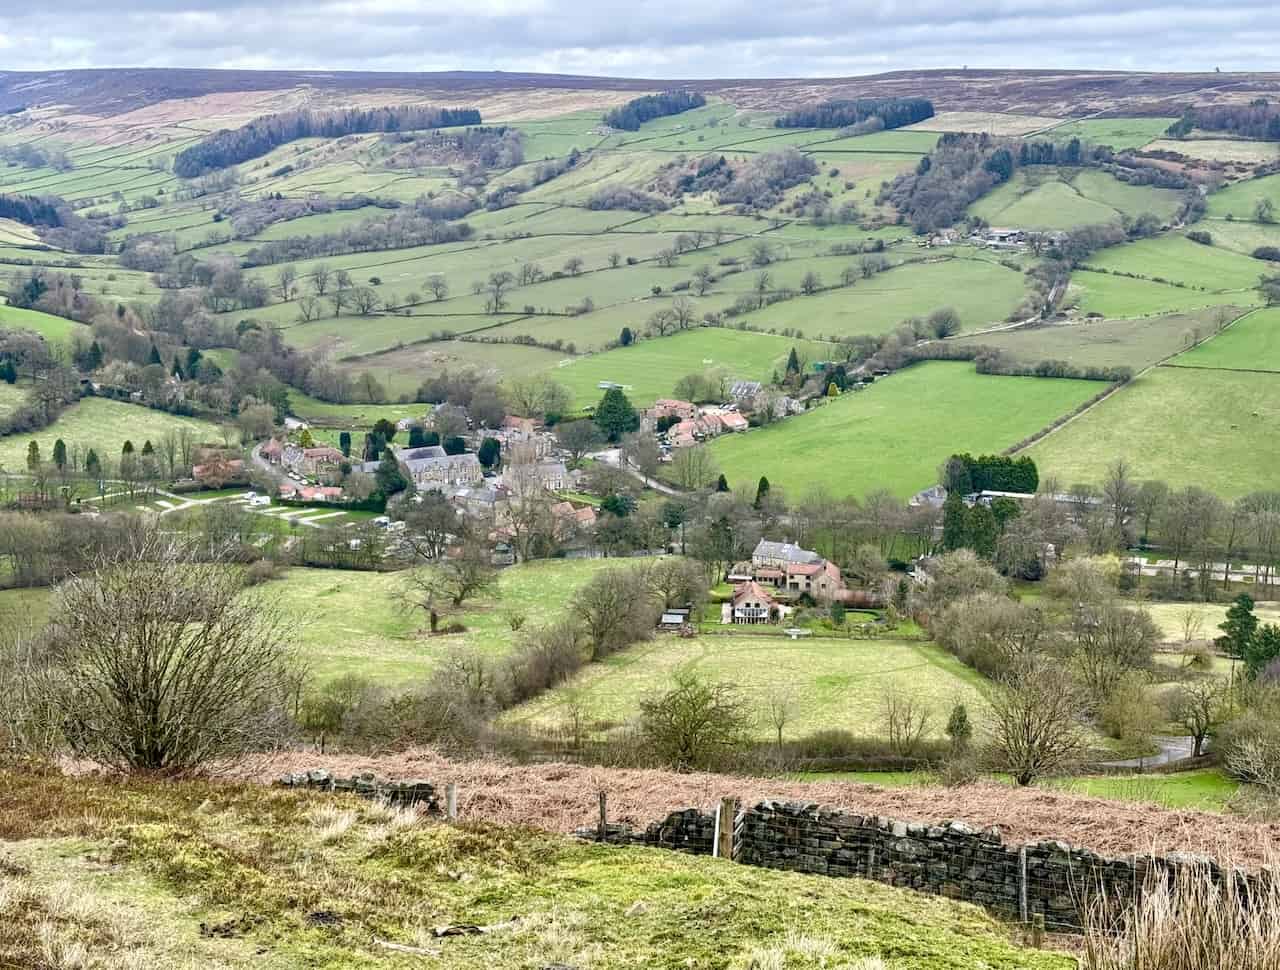 View descending to Rosedale Abbey village from Bank Top, capturing the essence of the Rosedale Abbey railway walk.
